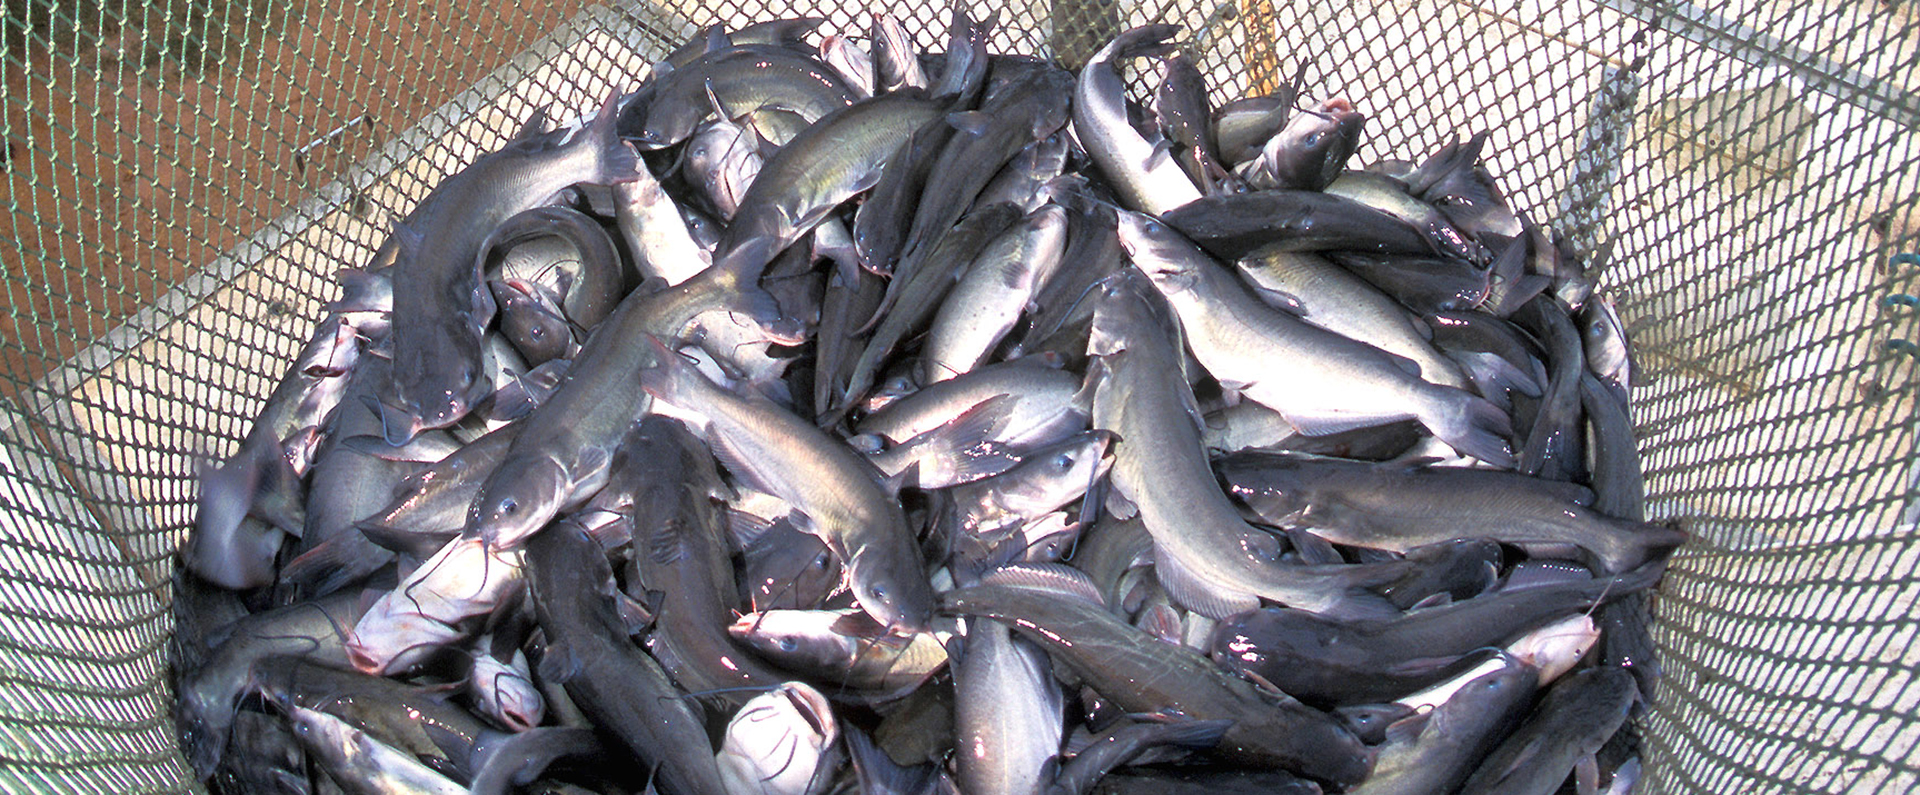 A basket containing freshly caught catfish 